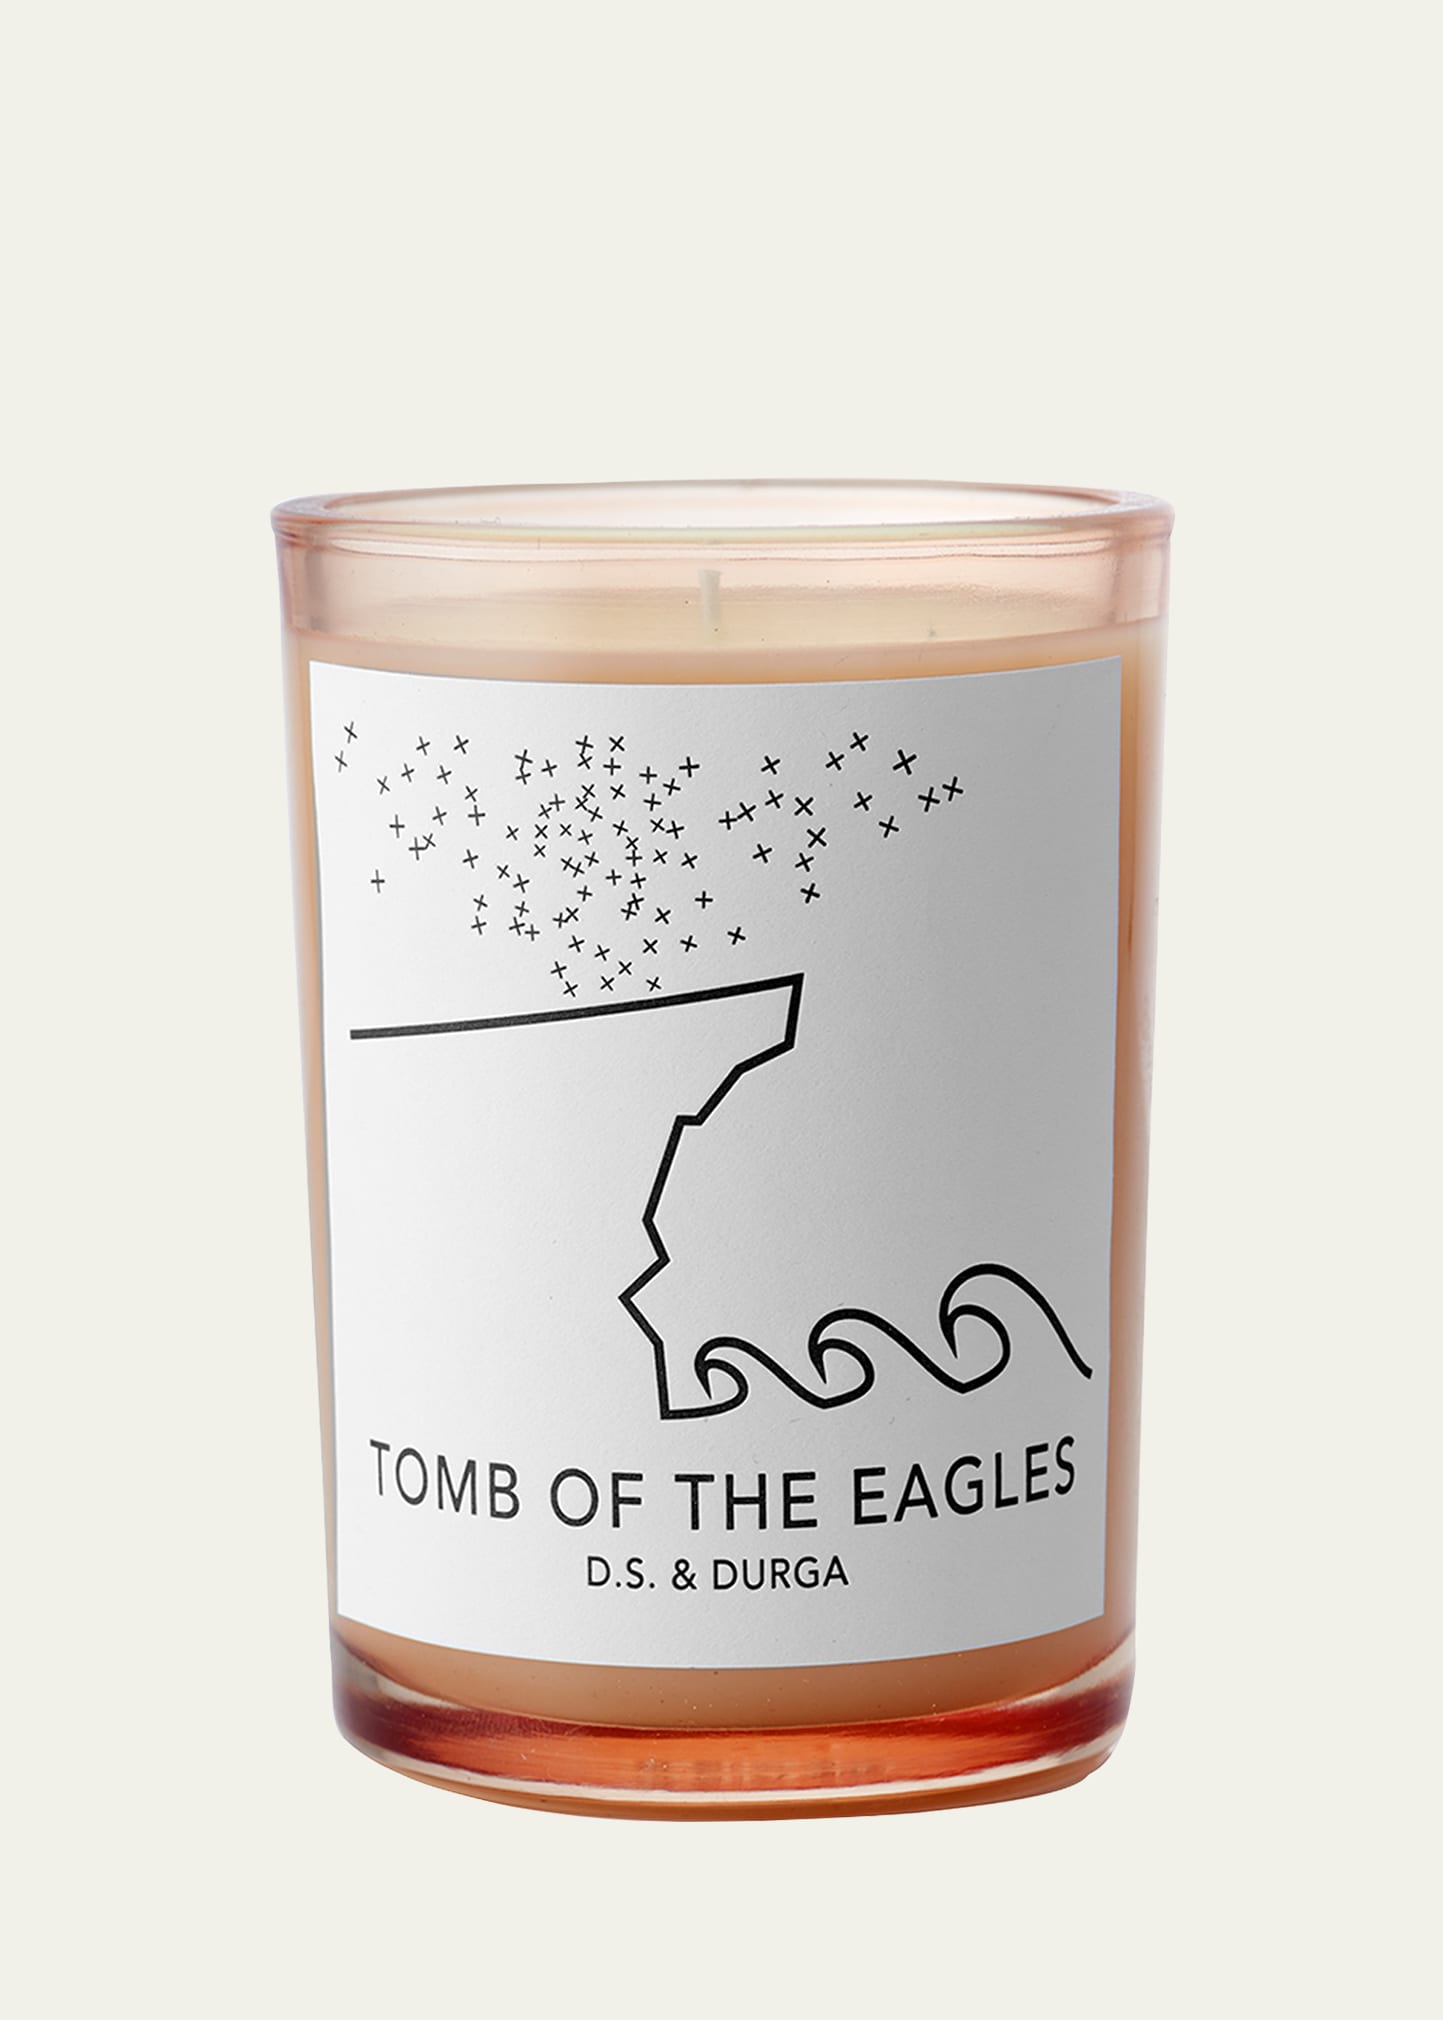 D.S. & DURGA 7 oz. Tomb of the Eagles Candle